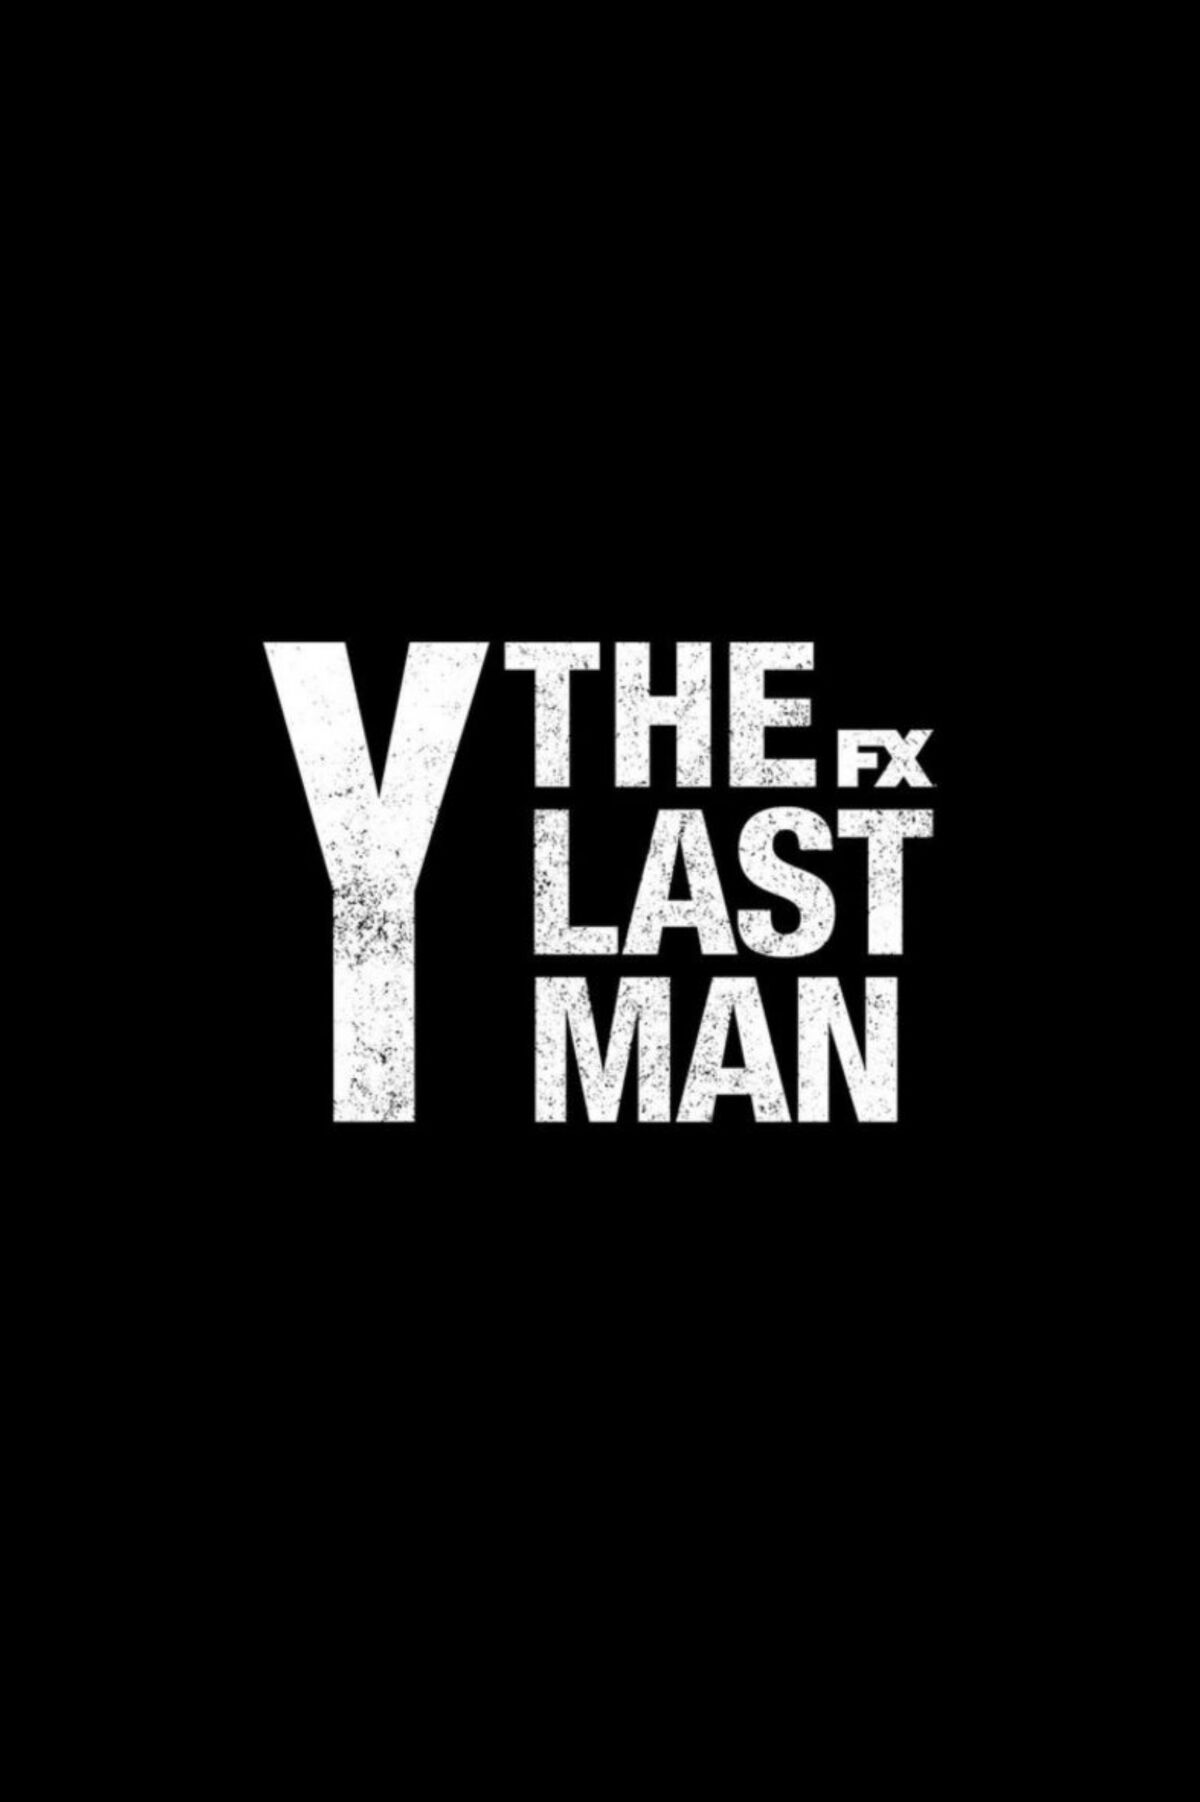 The Day Before, Y the Last Man Wiki